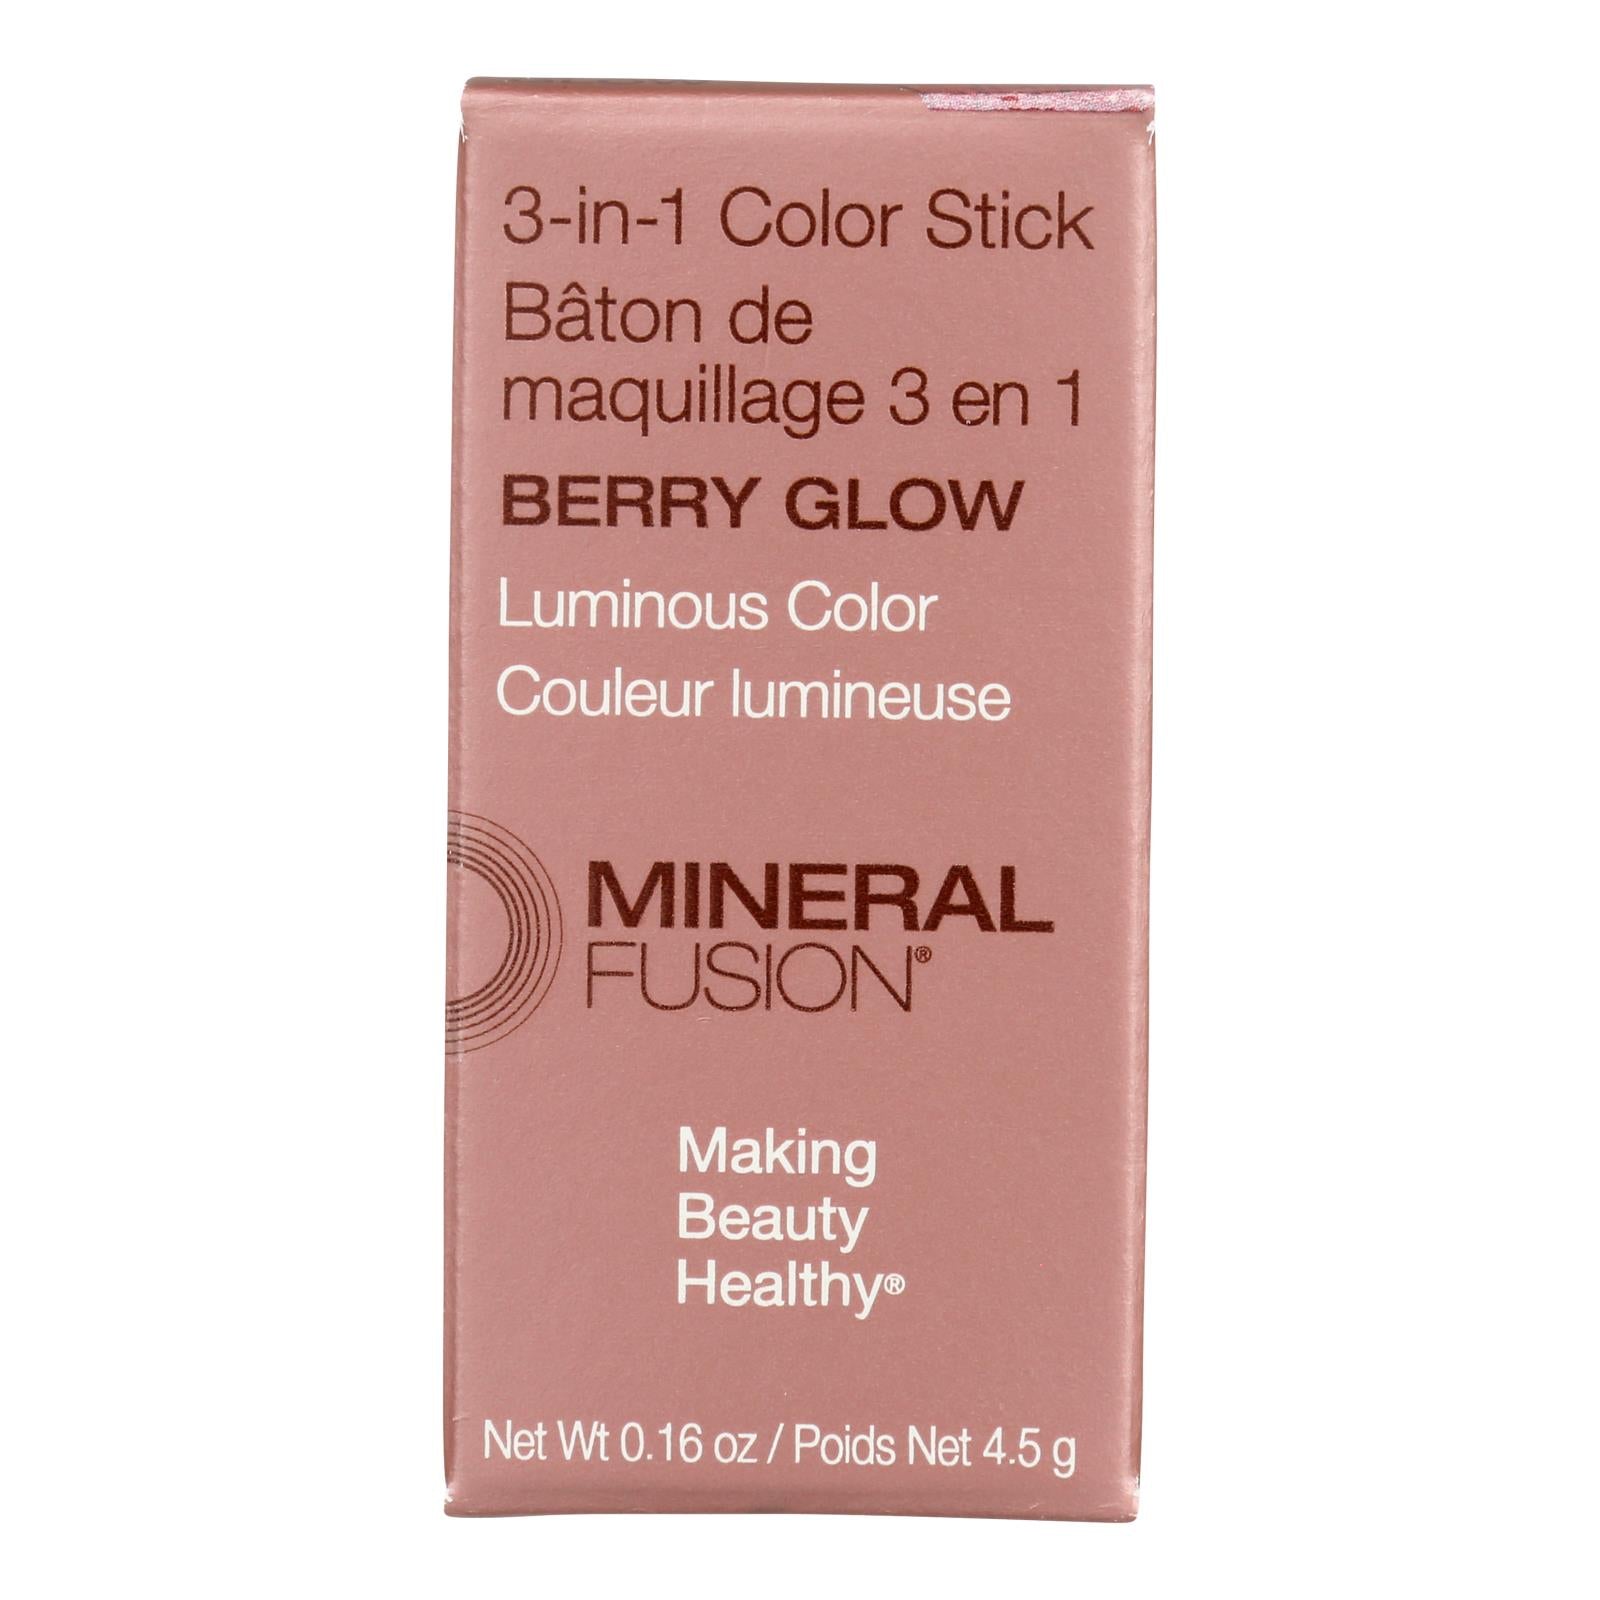 Mineral Fusion - Color Stk 3-in-1 Berry Glow - 1 Each-.16 Oz